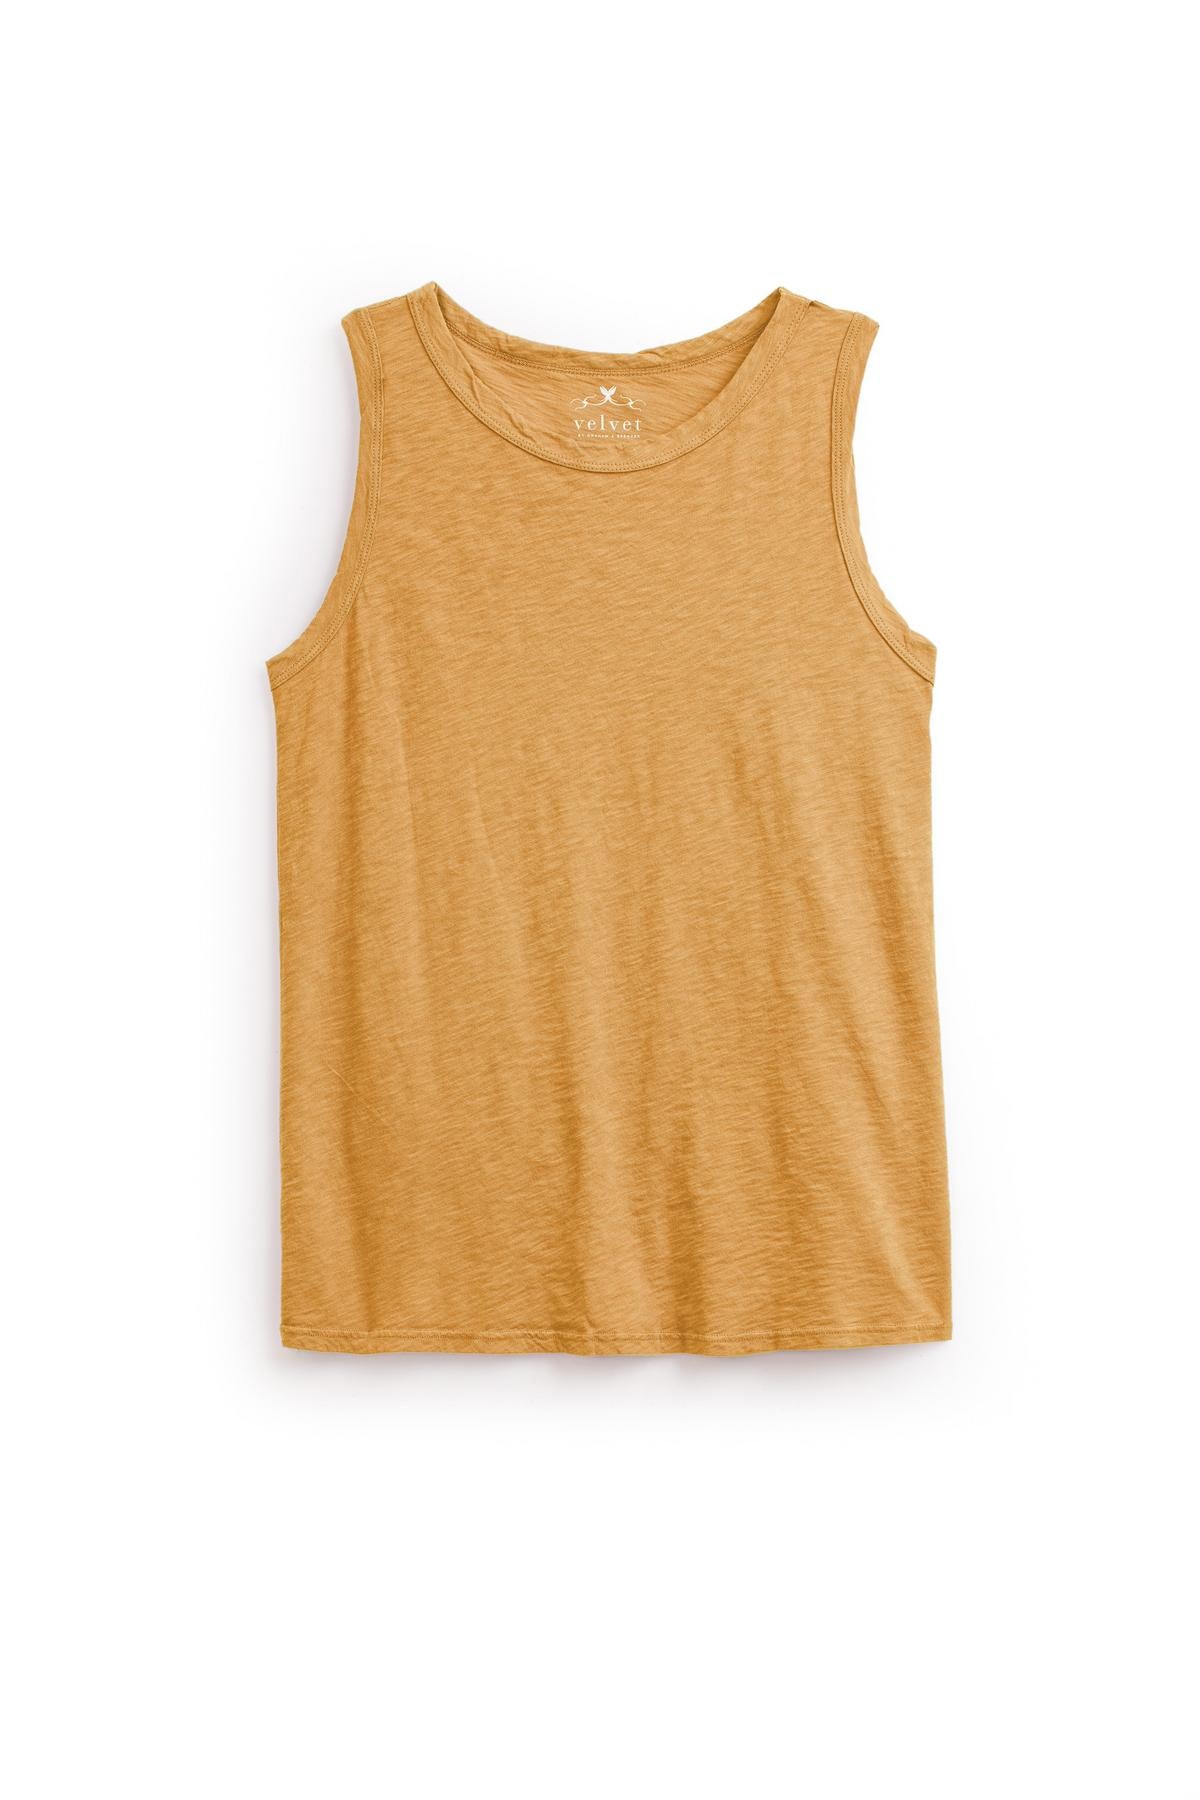 The Velvet by Graham & Spencer TAURUS TANK TOP is a timeless crew neck, sleeveless tank top in a mustard hue, crafted from textured cotton slub and displayed on a white background.-37648646996161